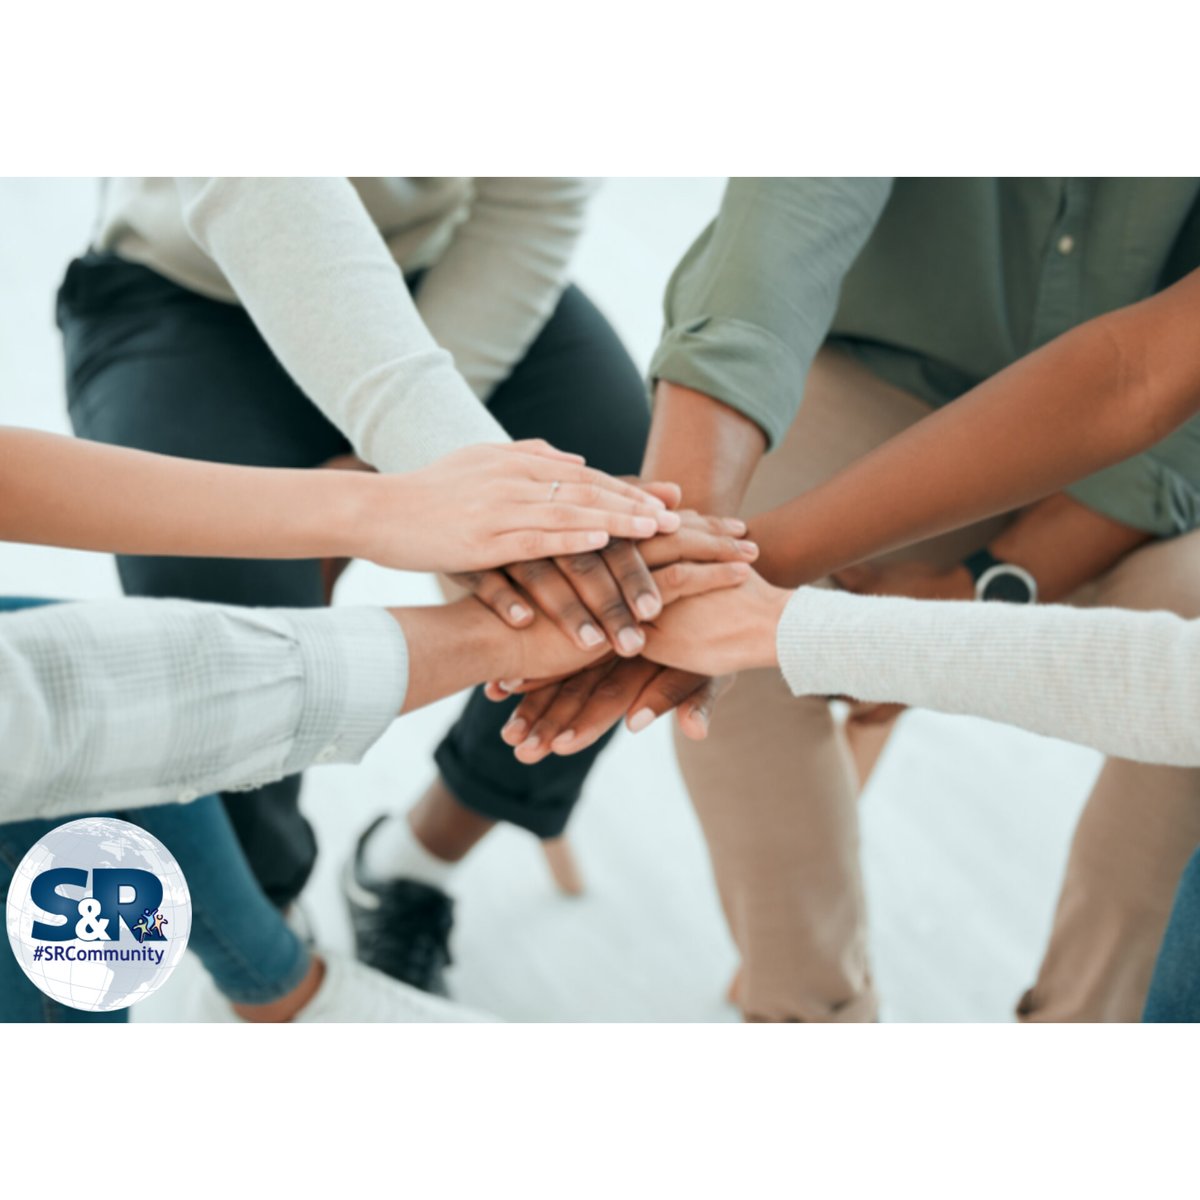 At Sinclair & Rush, we love giving back & supporting local Charities, and helping our Community. 

#srcommunity #ukmanufacturer #supporting #morethanjustaplasticscompany #givingback